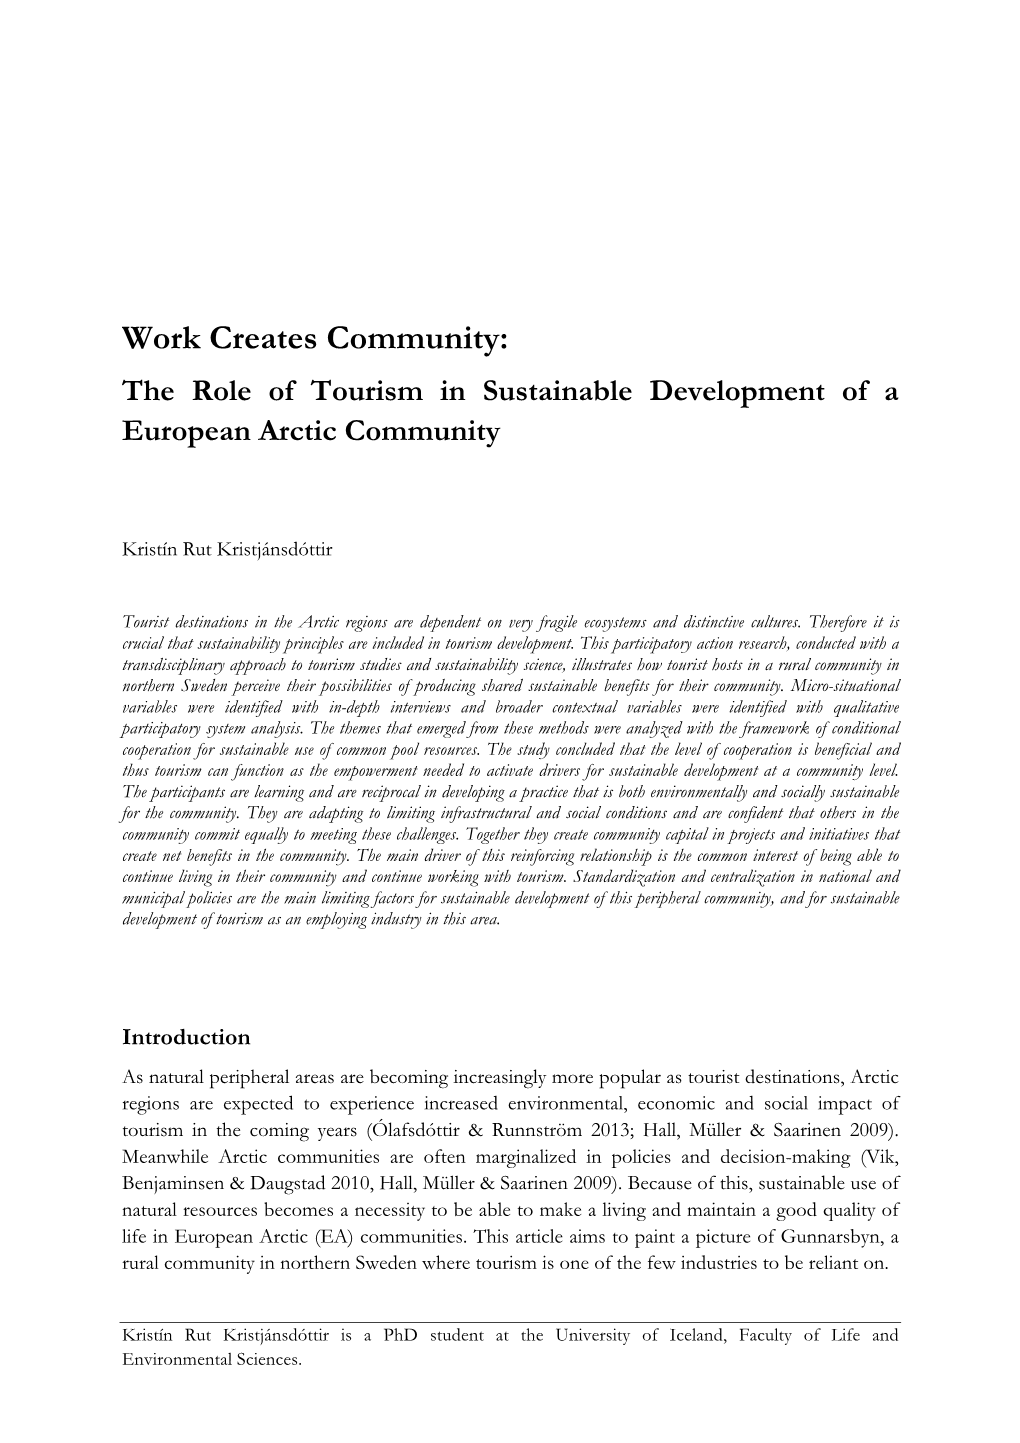 Work Creates Community: the Role of Tourism in Sustainable Development of a European Arctic Community